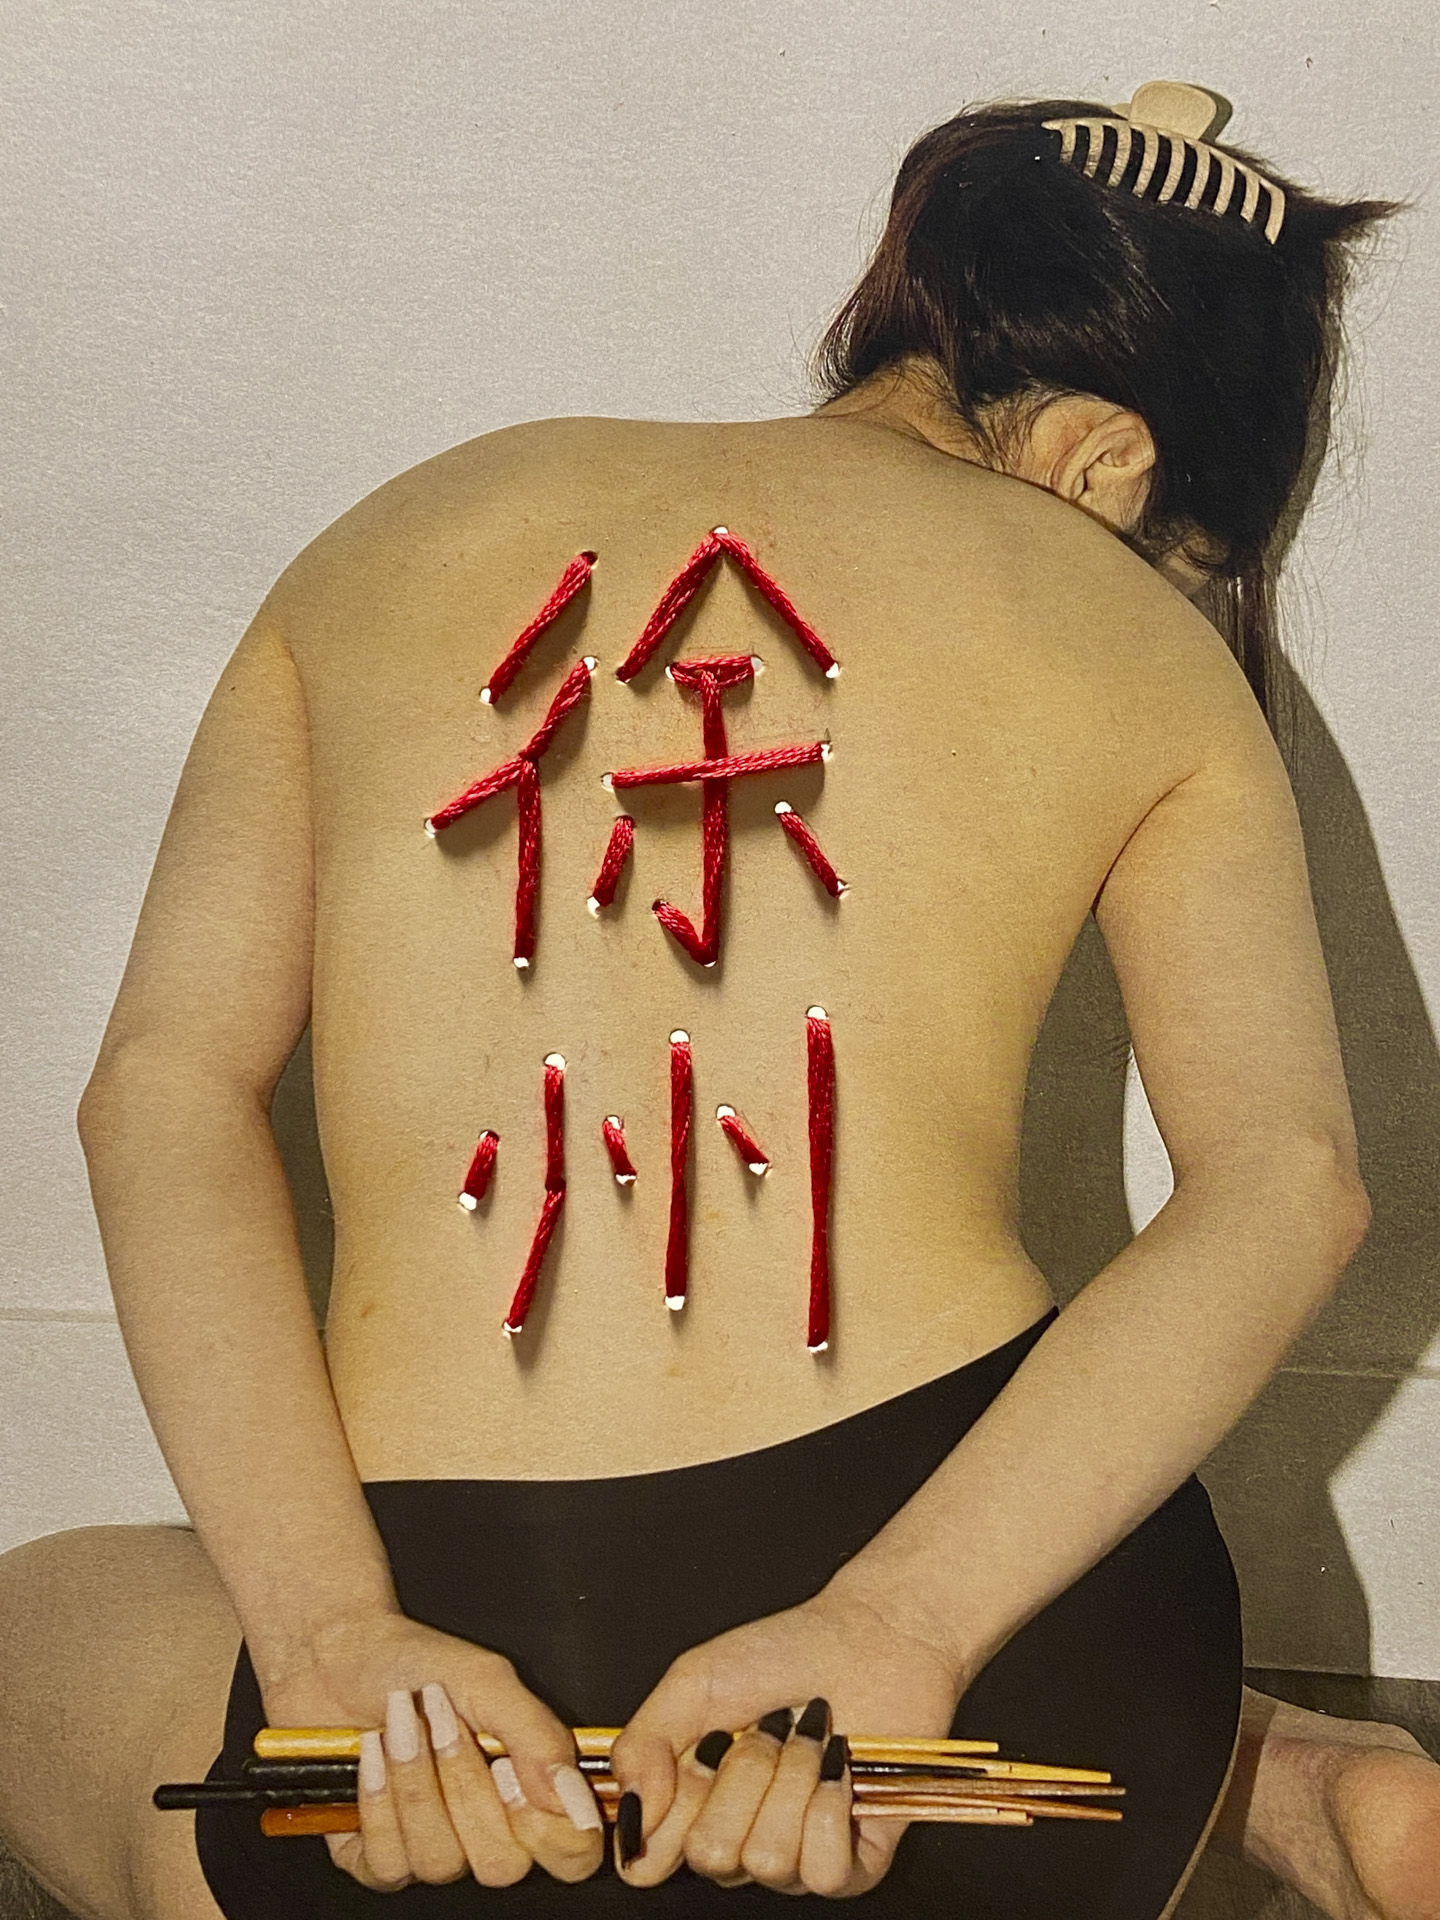 photo of a human's back with non-english characters written on their back